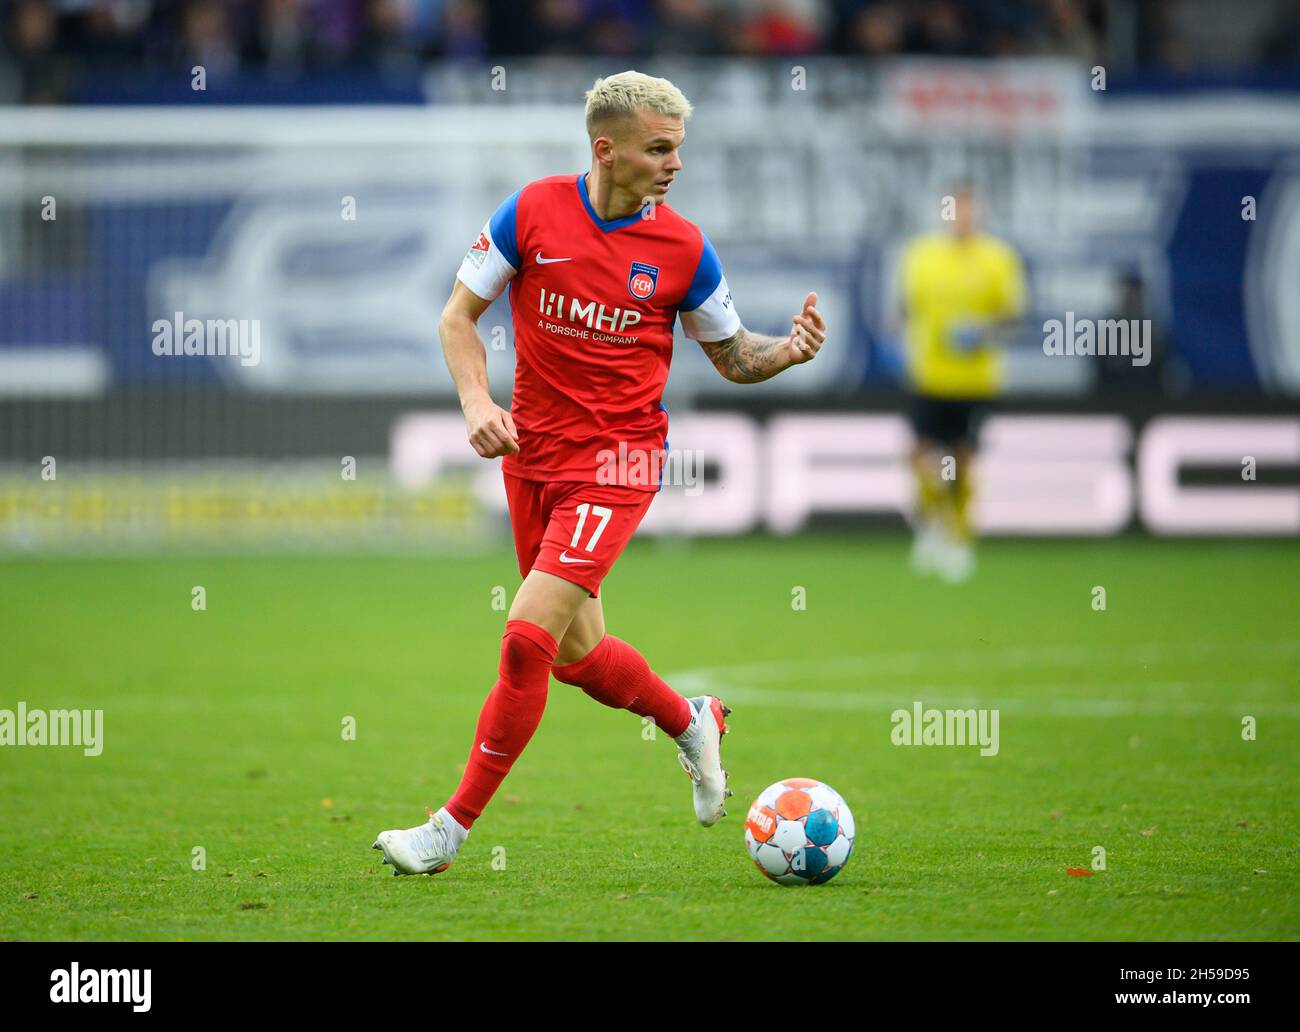 Aue, Germany. 07th Nov, 2021. Football: 2. Bundesliga, Erzgebirge Aue - 1. FC Heidenheim, Matchday 13, Erzgebirgsstadion. Heidenheim's Florian Pick plays the ball. Credit: Robert Michael/dpa-Zentralbild/dpa - IMPORTANT NOTE: In accordance with the regulations of the DFL Deutsche Fußball Liga and/or the DFB Deutscher Fußball-Bund, it is prohibited to use or have used photographs taken in the stadium and/or of the match in the form of sequence pictures and/or video-like photo series./dpa/Alamy Live News Stock Photo